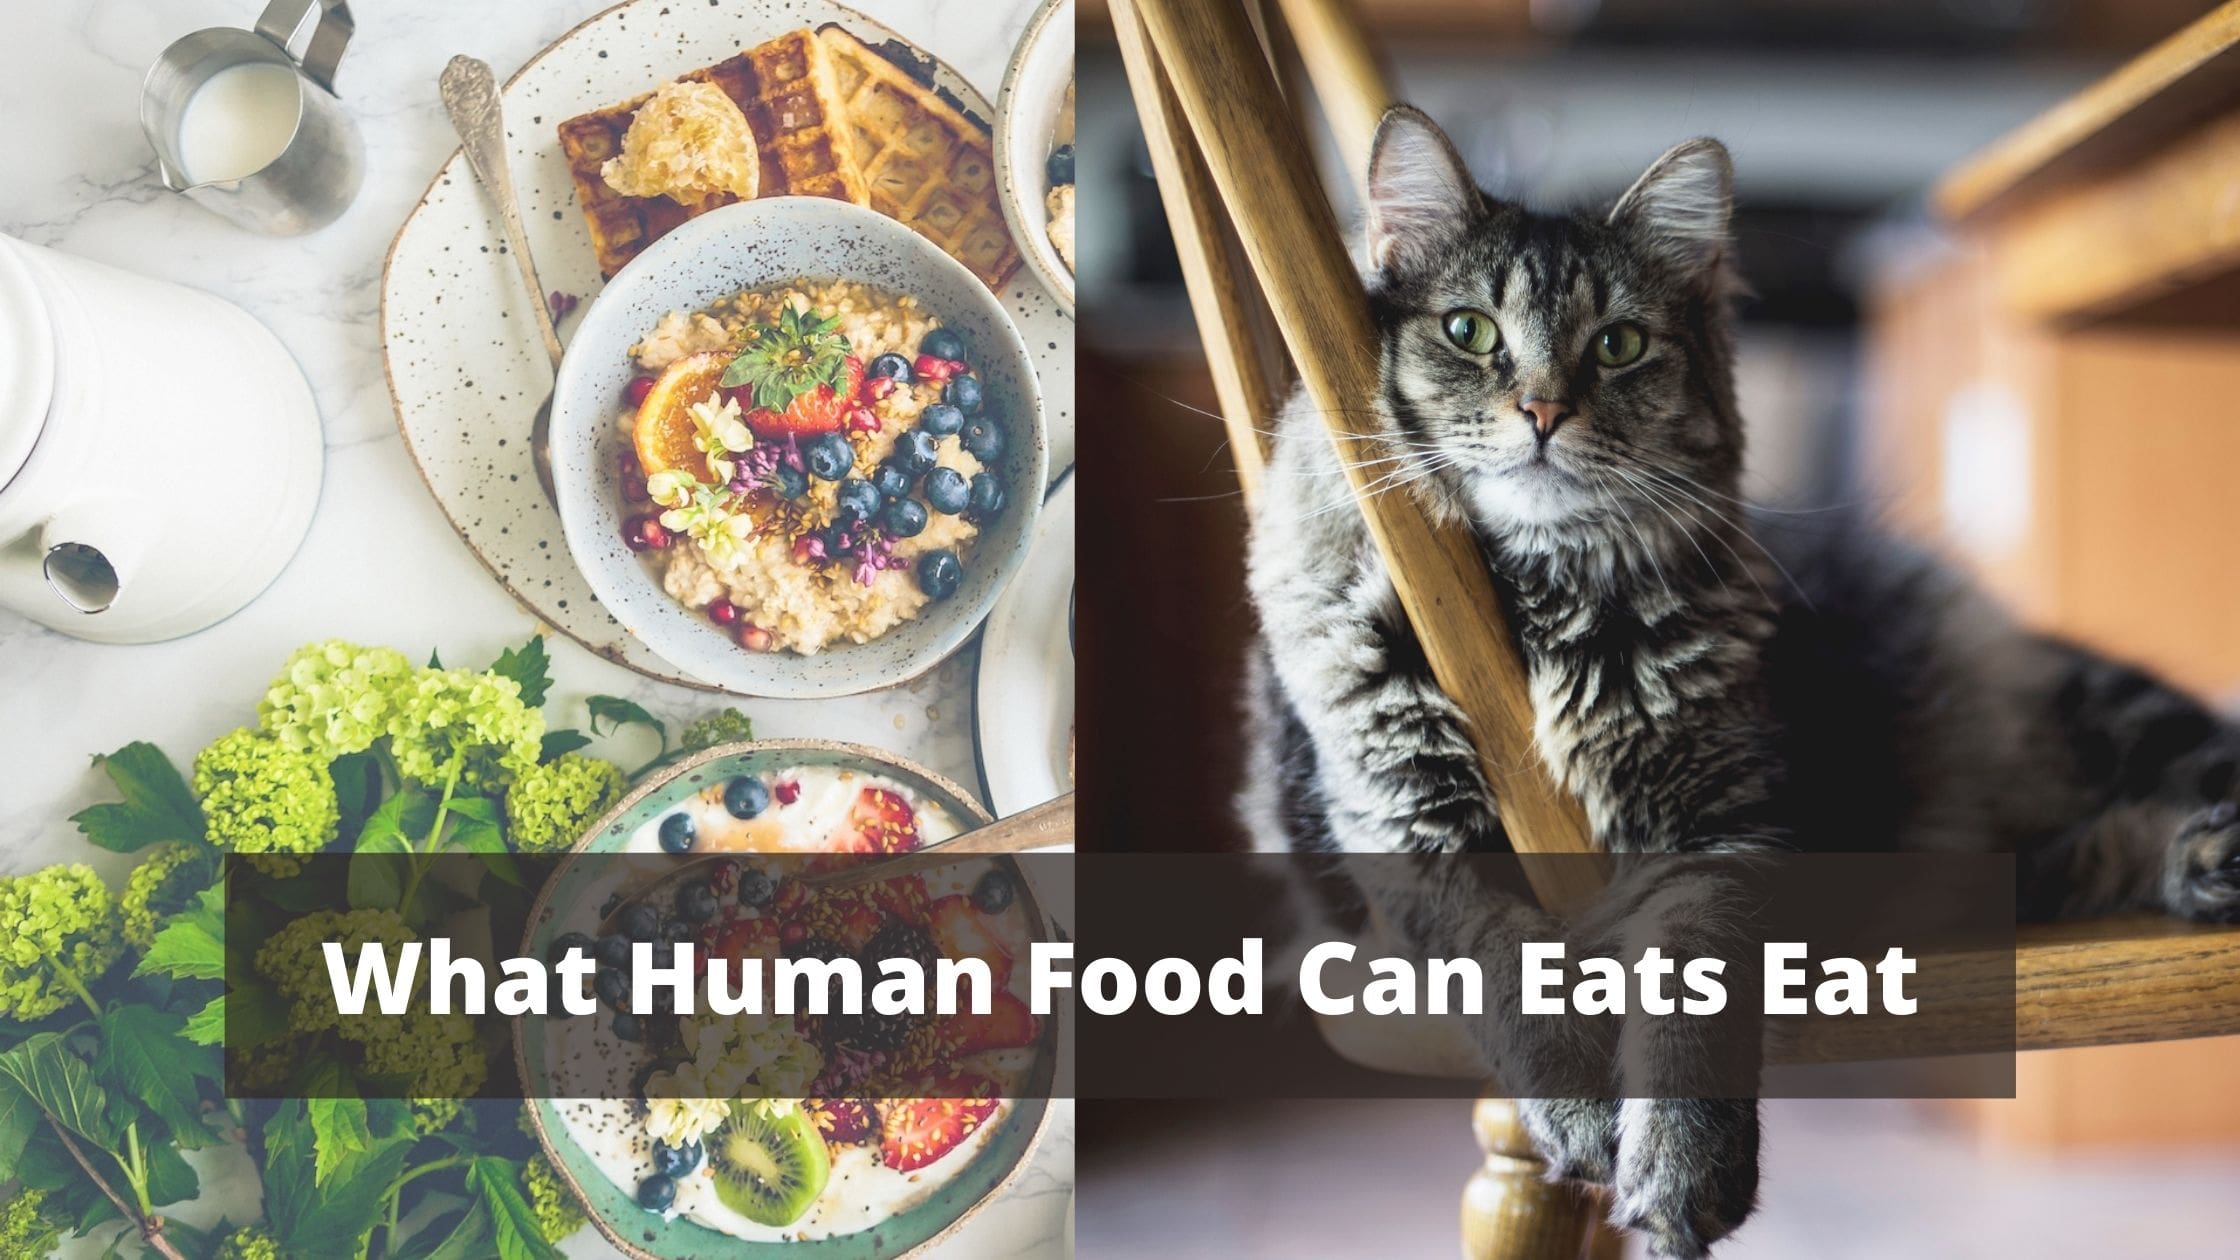 What Human Food Can Eats Eat